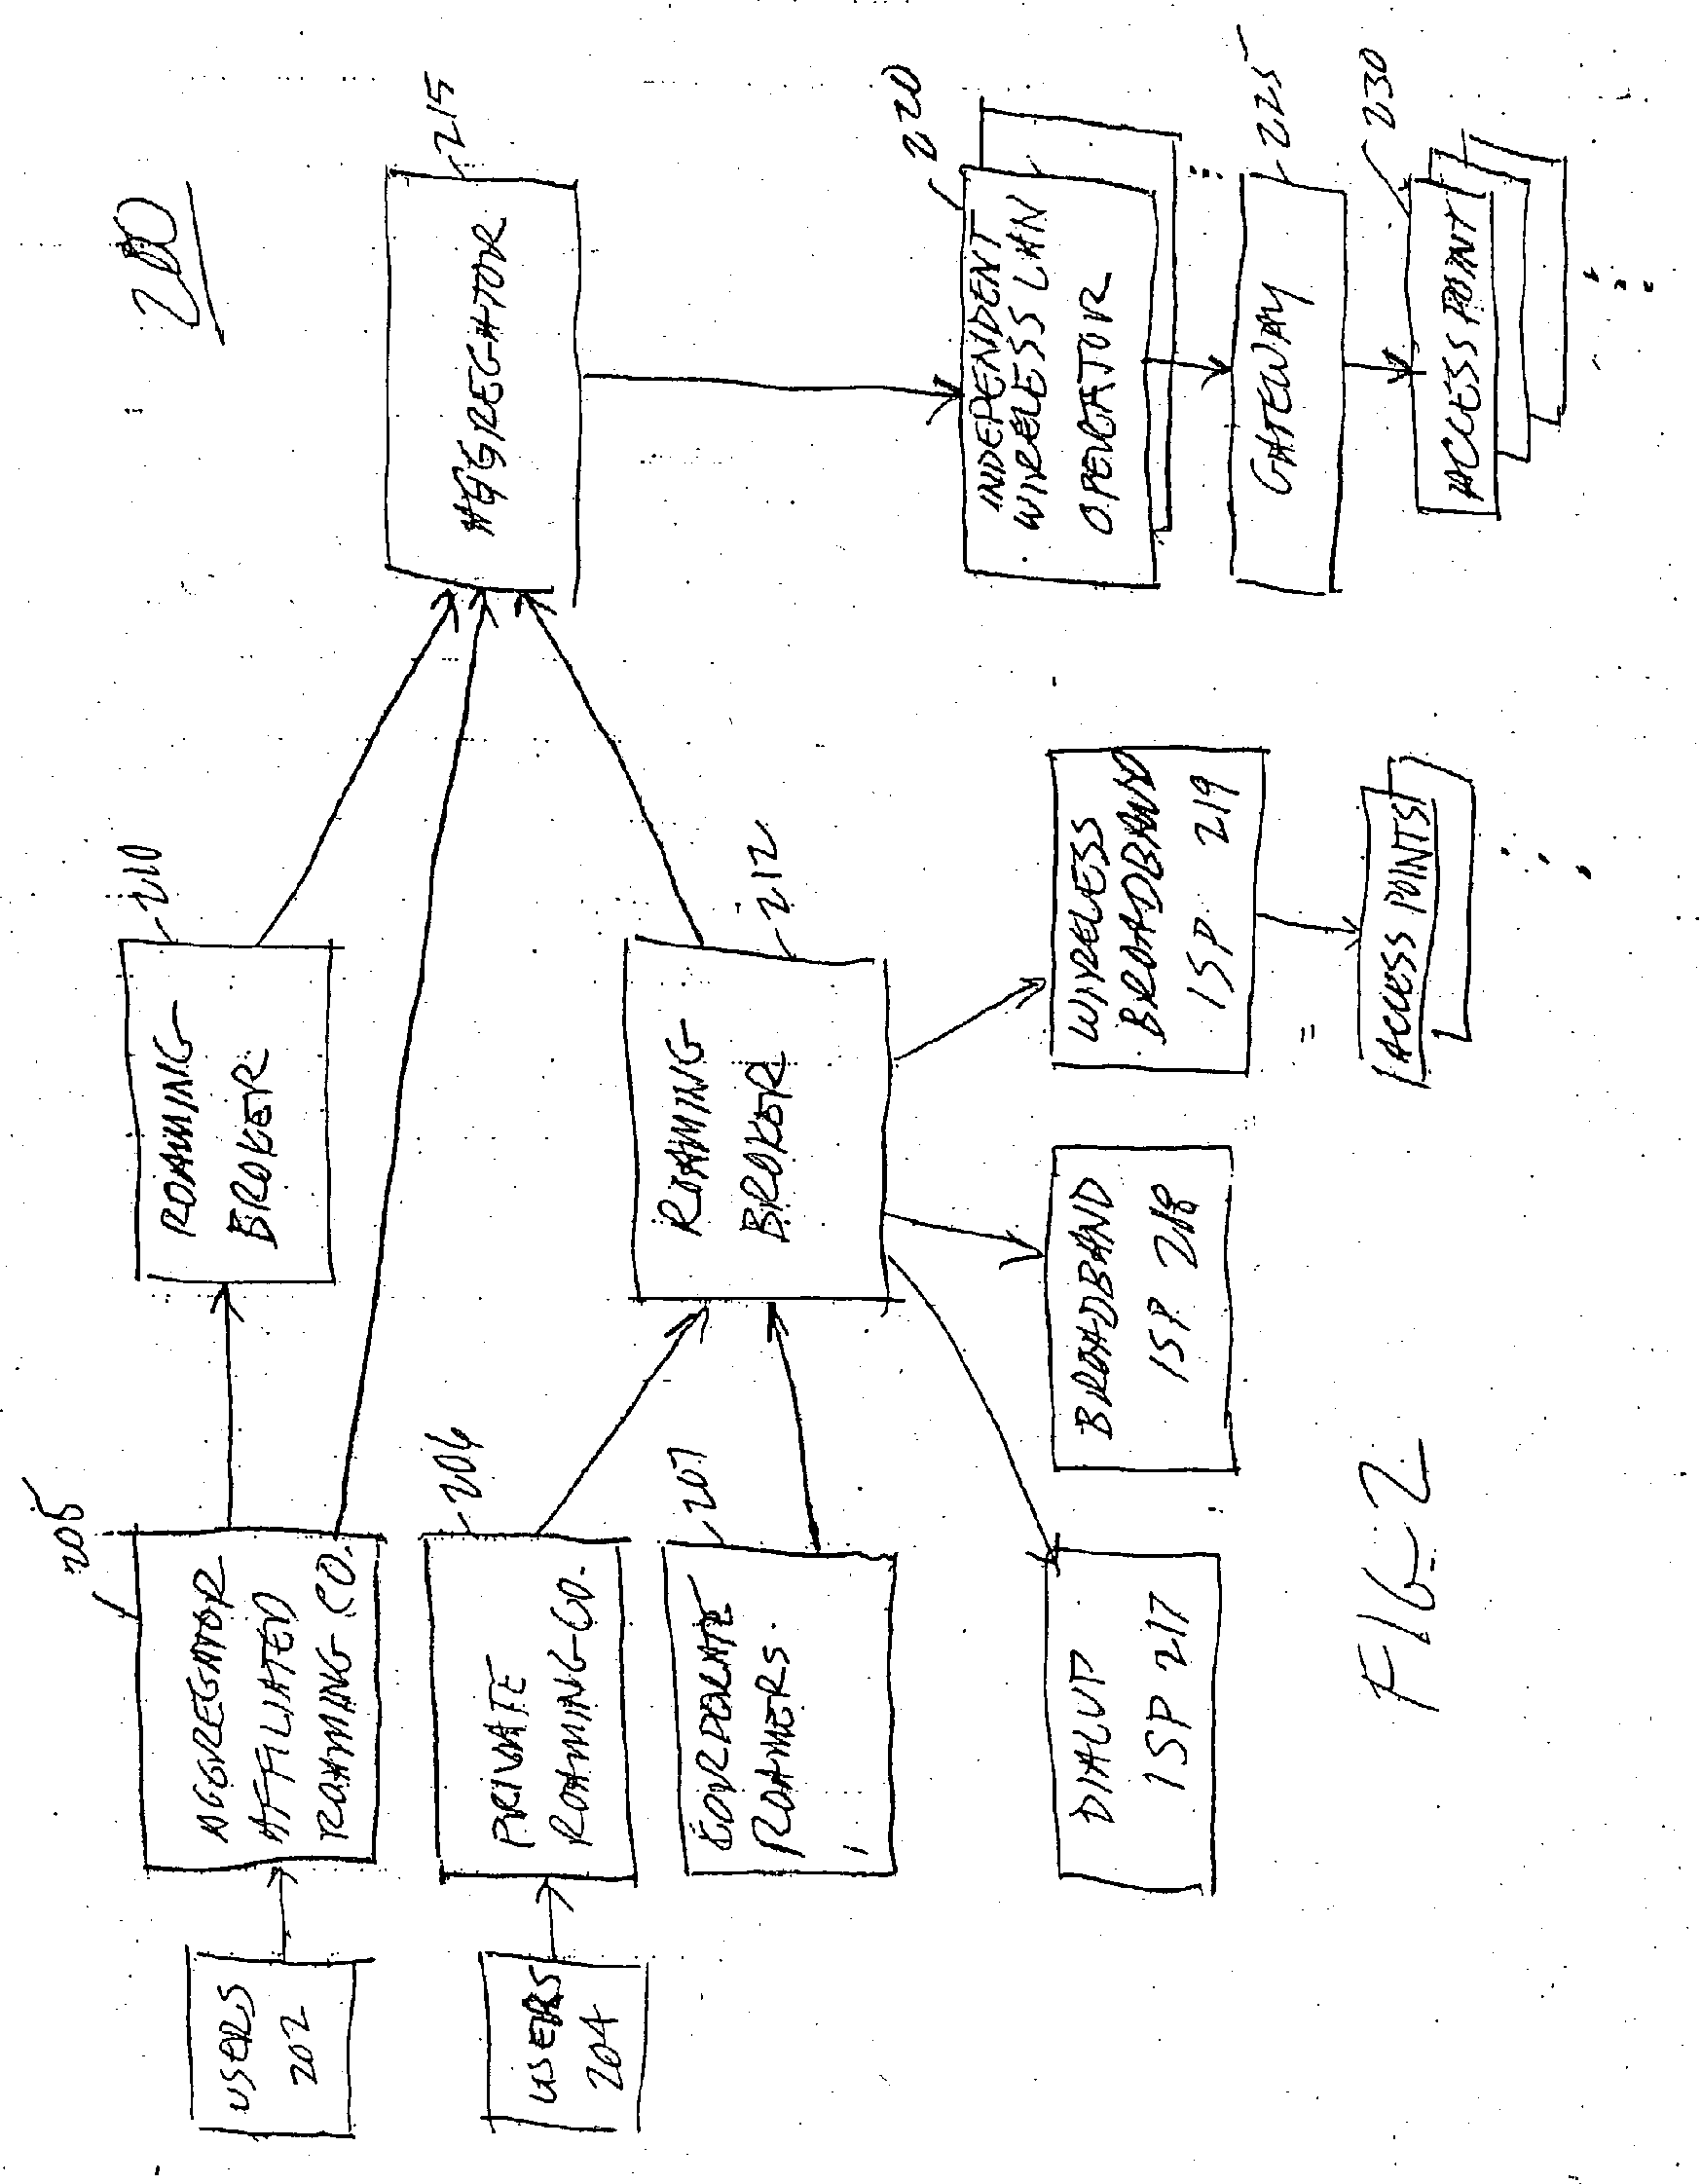 System for on-demand access to local area networks